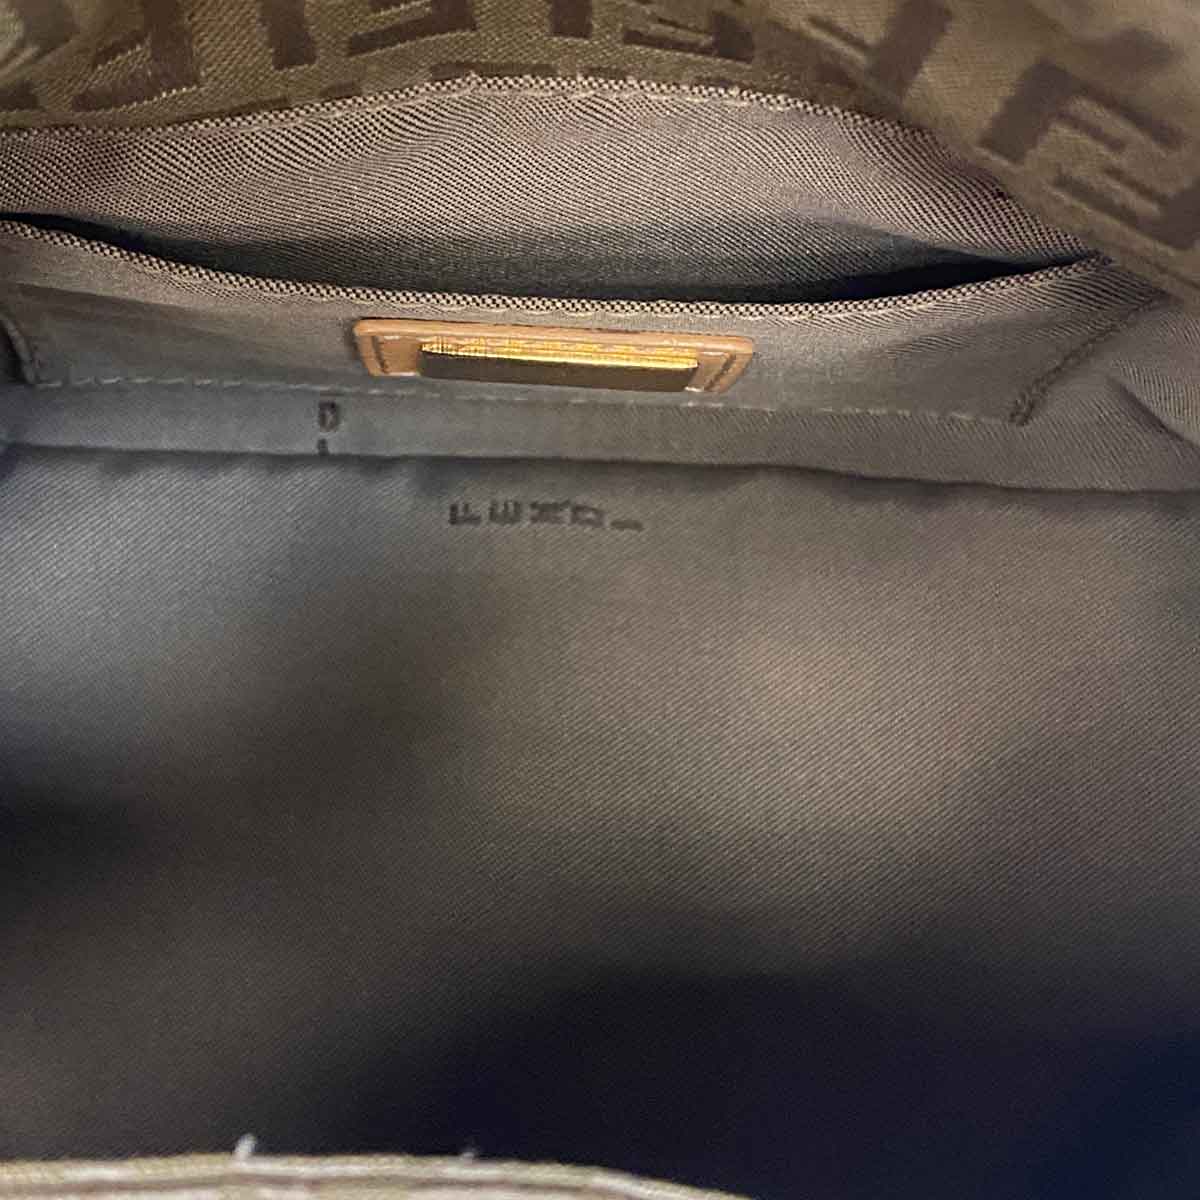 Fendi Bags for sale in Chicago, Illinois, Facebook Marketplace